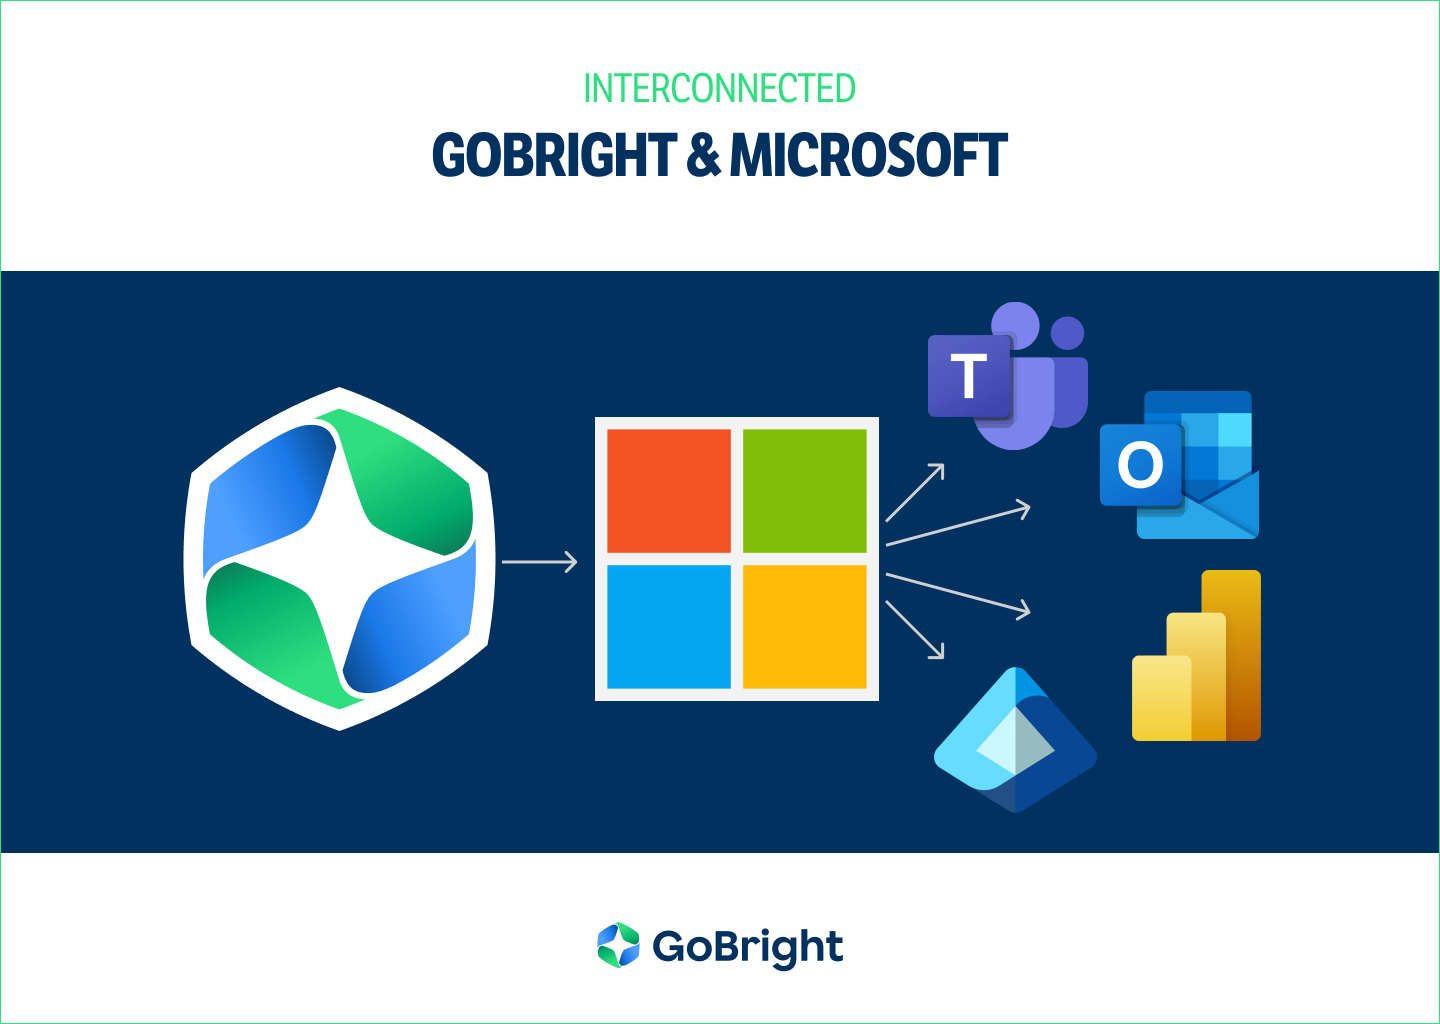 GoBright & Microsoft are Interconnected